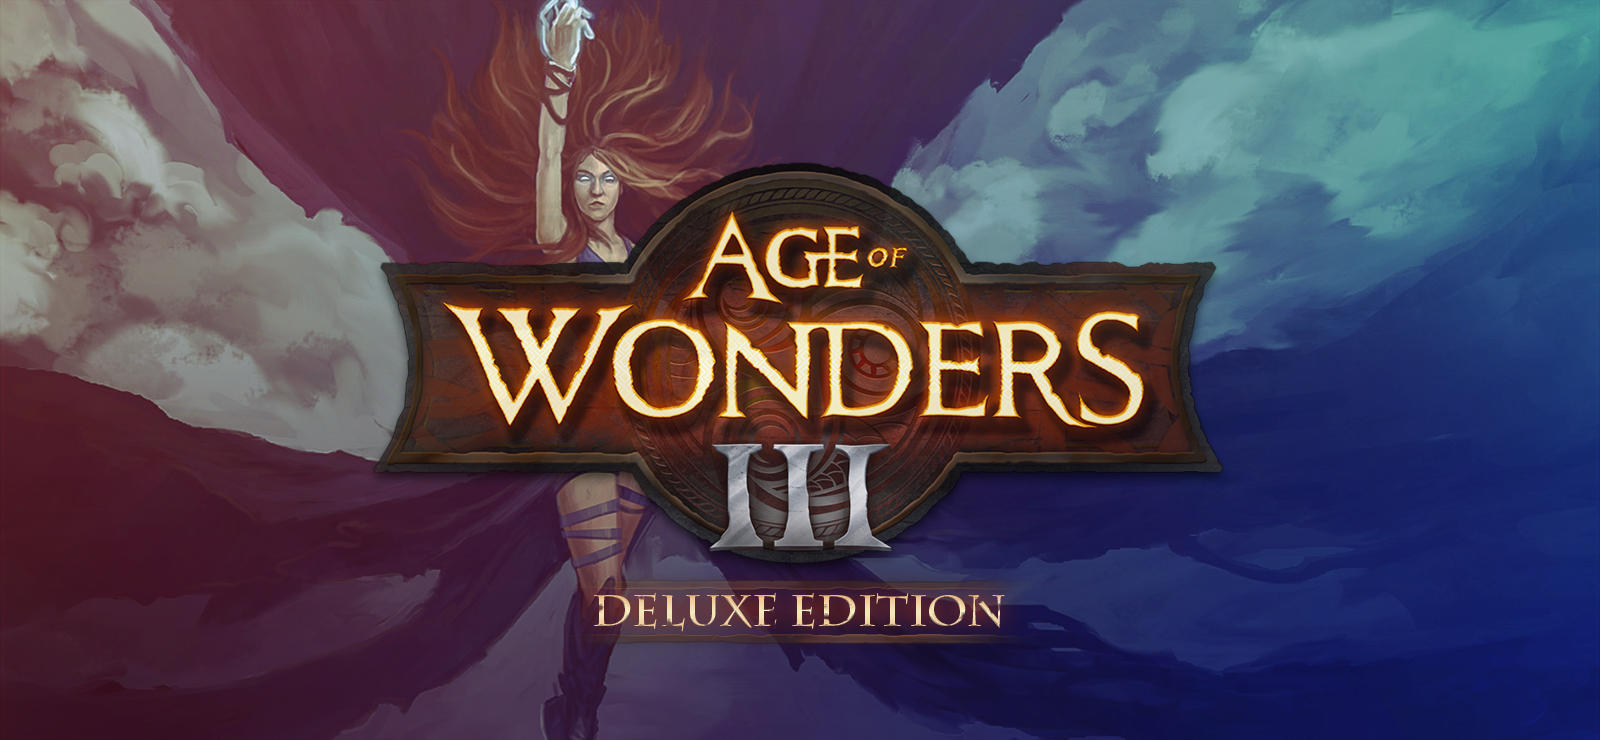 Age Of Wonders 3 Deluxe Edition